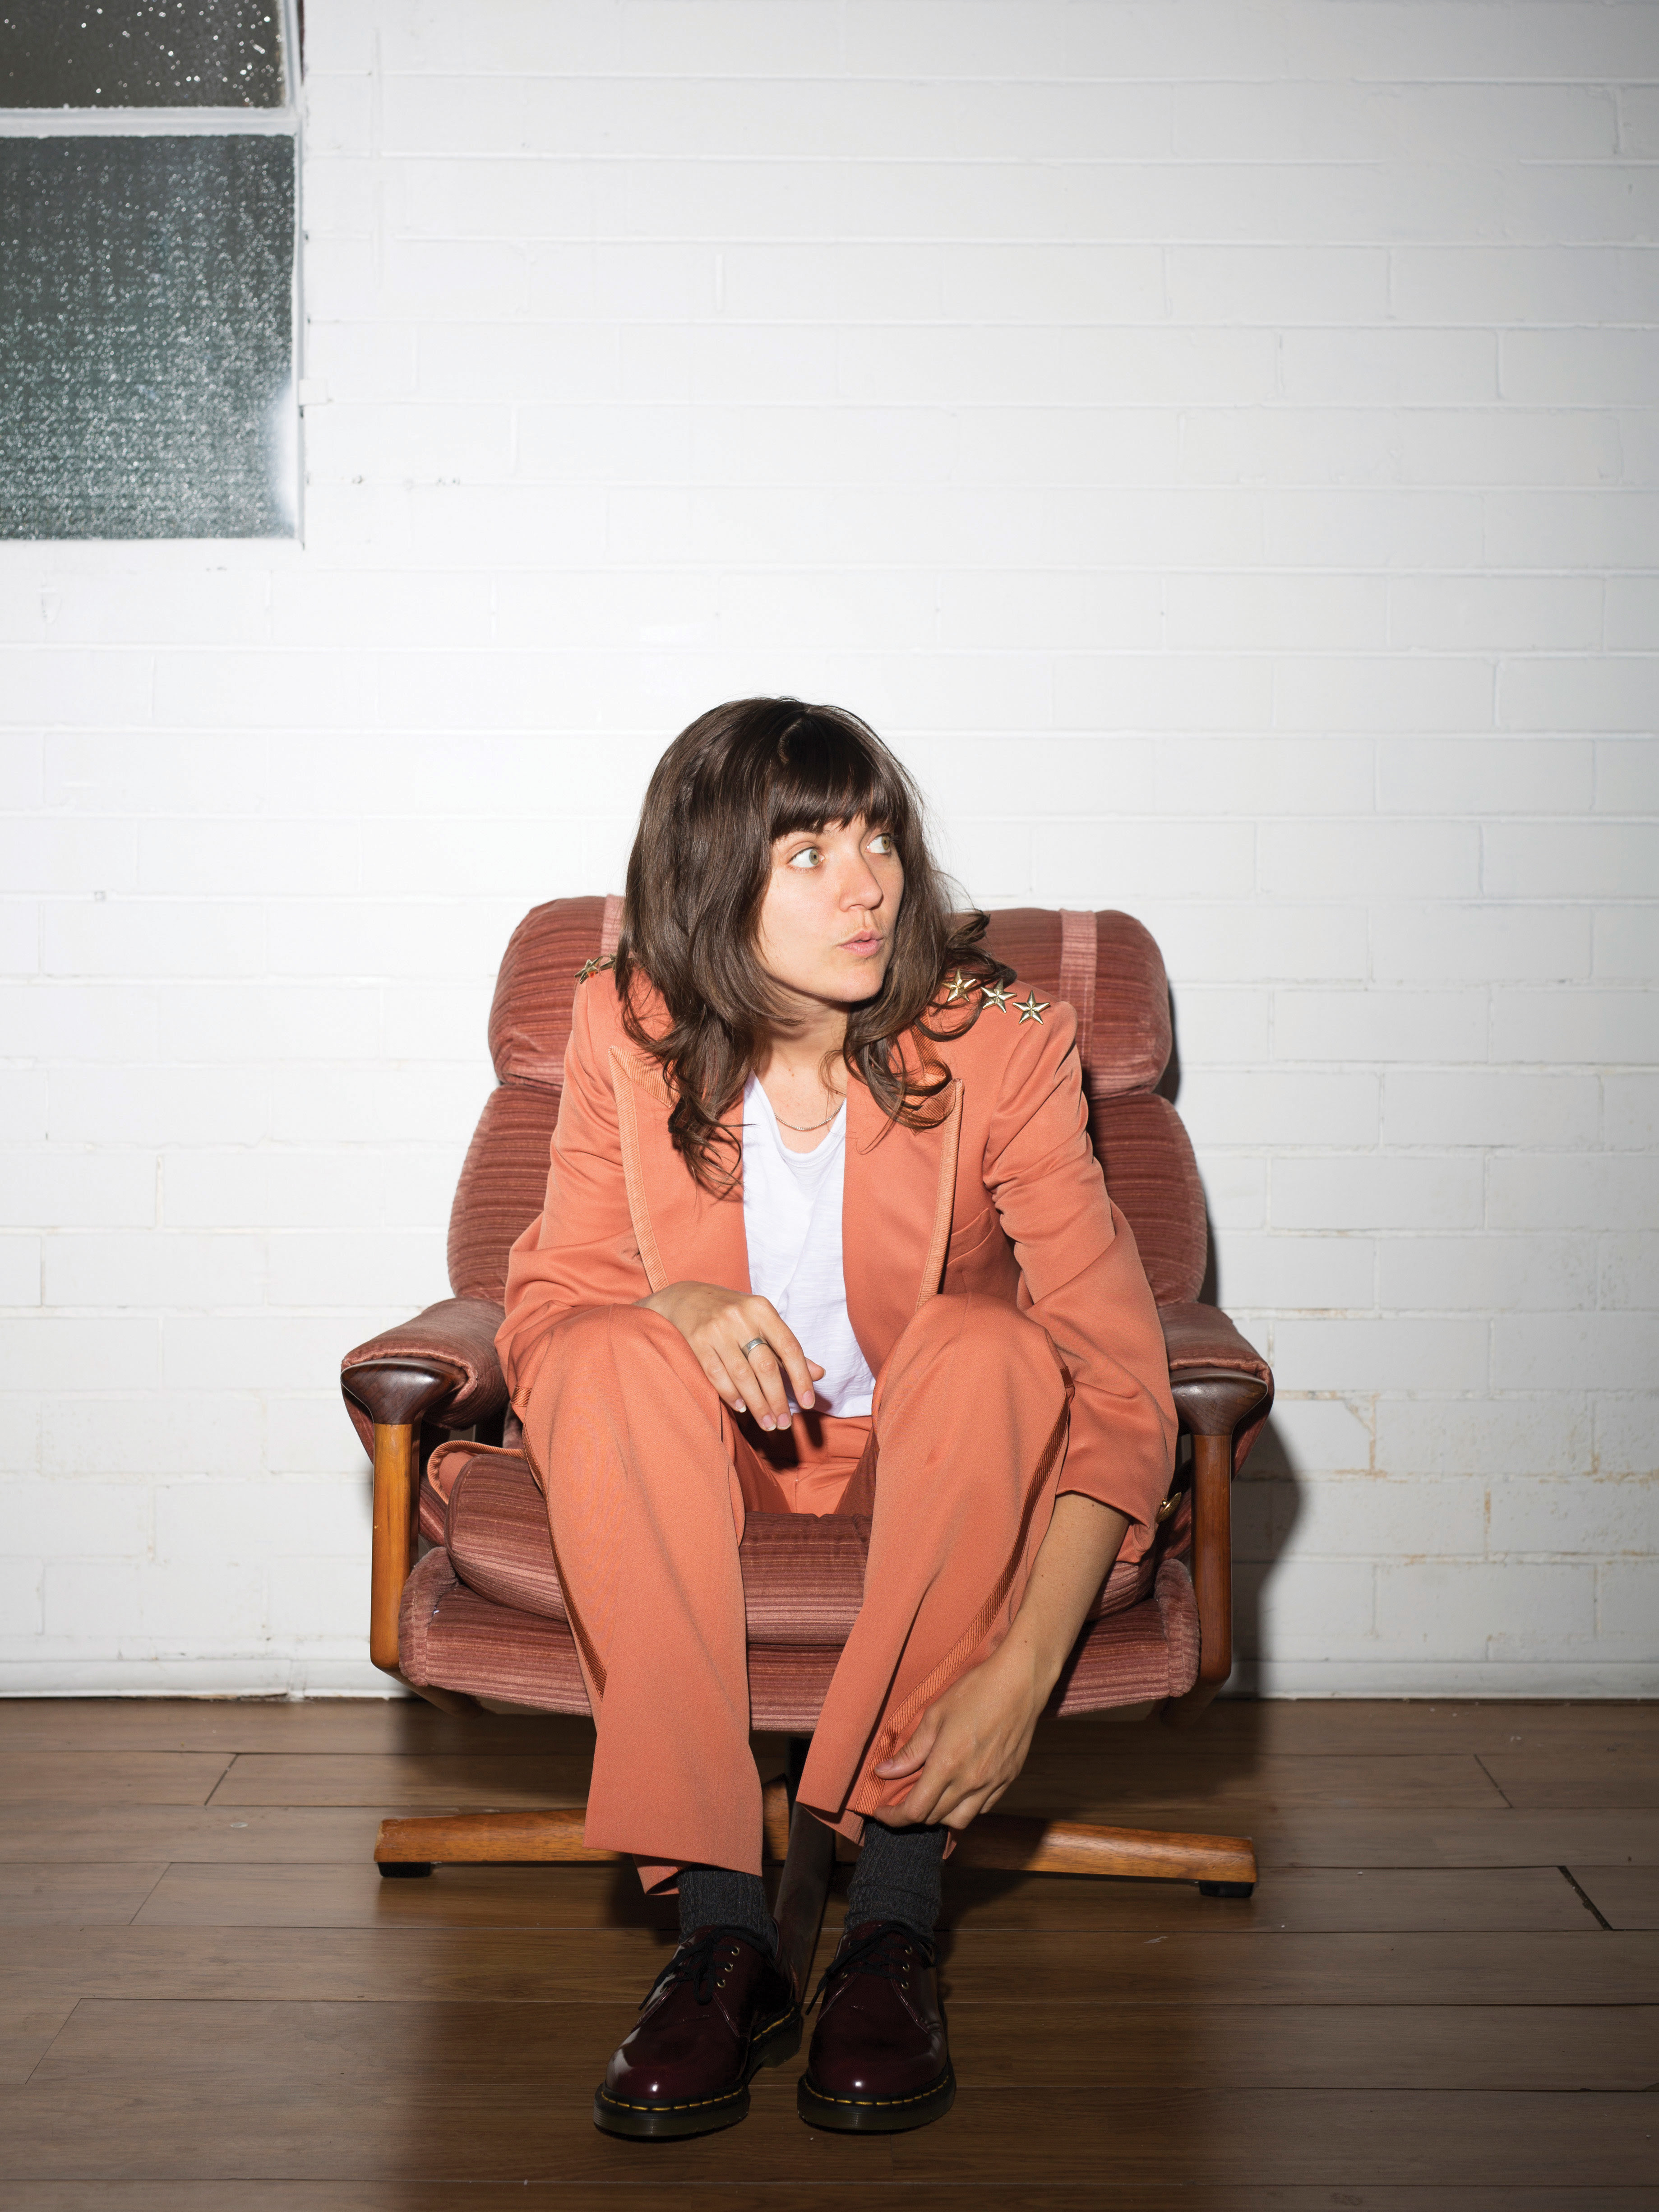 Courtney Barnett has Shared her new single "Everybody Here Hates You."